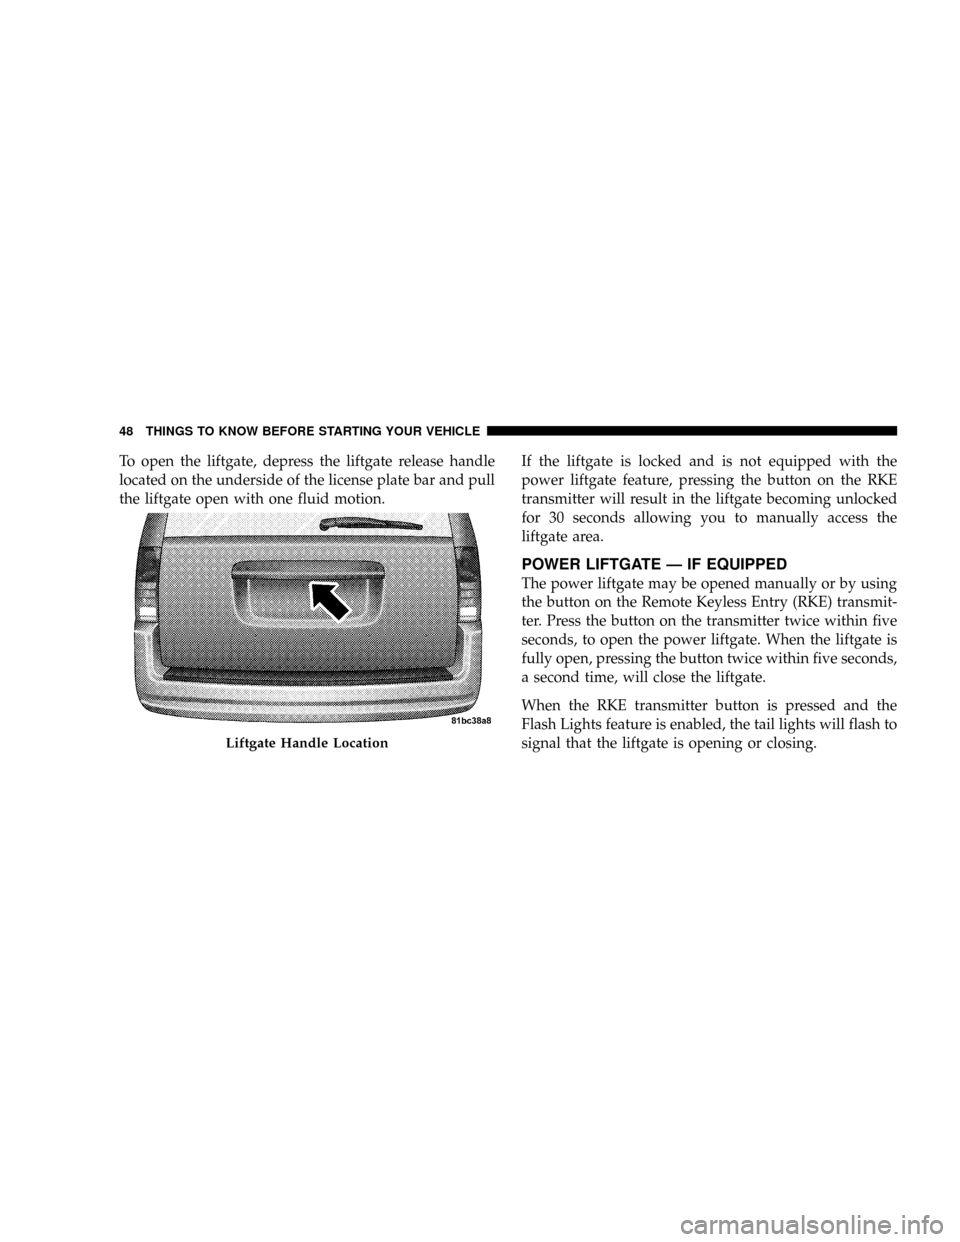 CHRYSLER TOWN AND COUNTRY 2008 5.G Owners Manual To open the liftgate, depress the liftgate release handle
located on the underside of the license plate bar and pull
the liftgate open with one fluid motion.If the liftgate is locked and is not equipp